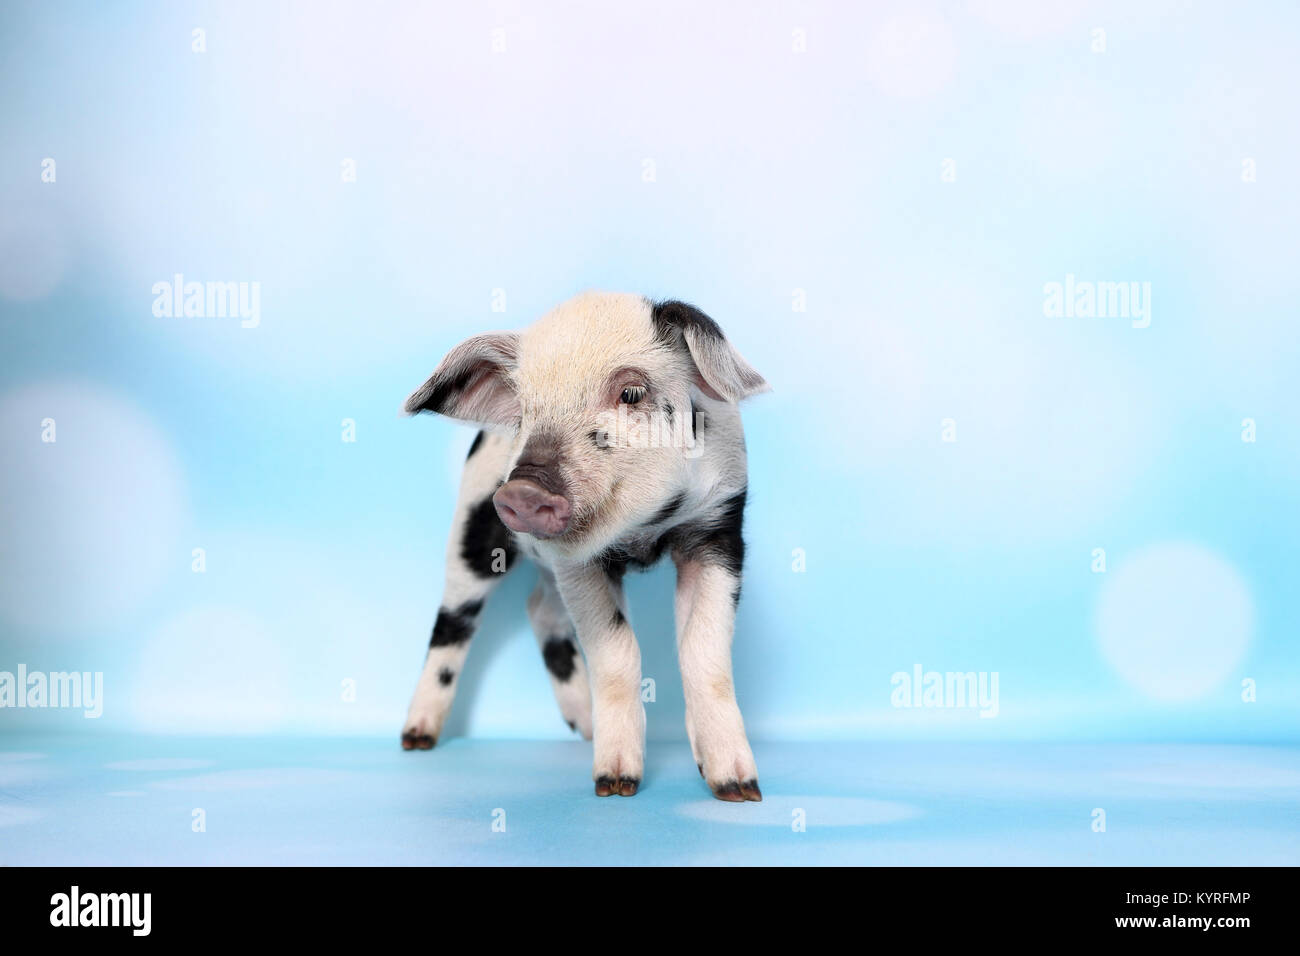 Domestic Pig, Turopolje x ?. Piglet (3 weeks old) standing. Studio picture seen against a light blue background. Germany Stock Photo